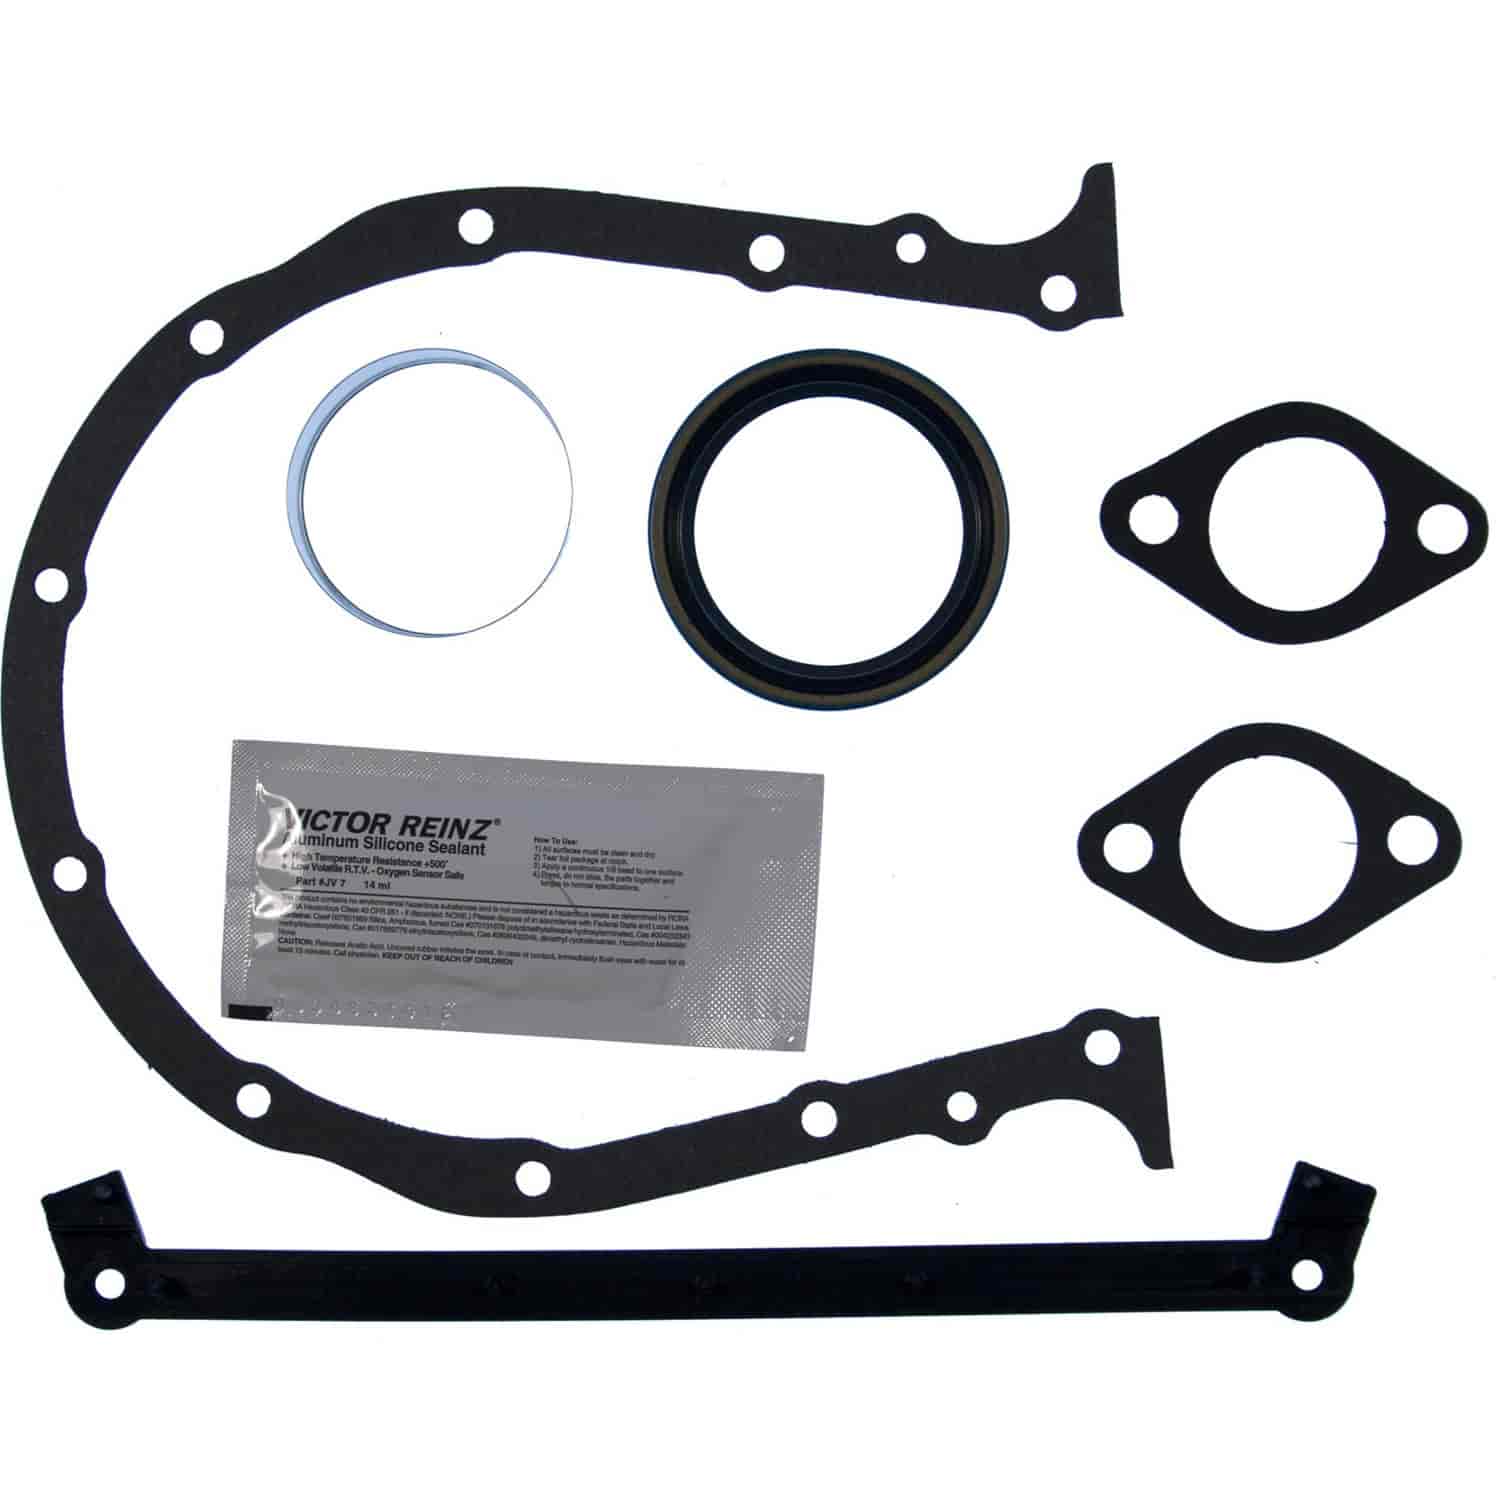 Timing Cover Gasket Set 1965-1990 Big Block Chevy 396/402/427/454